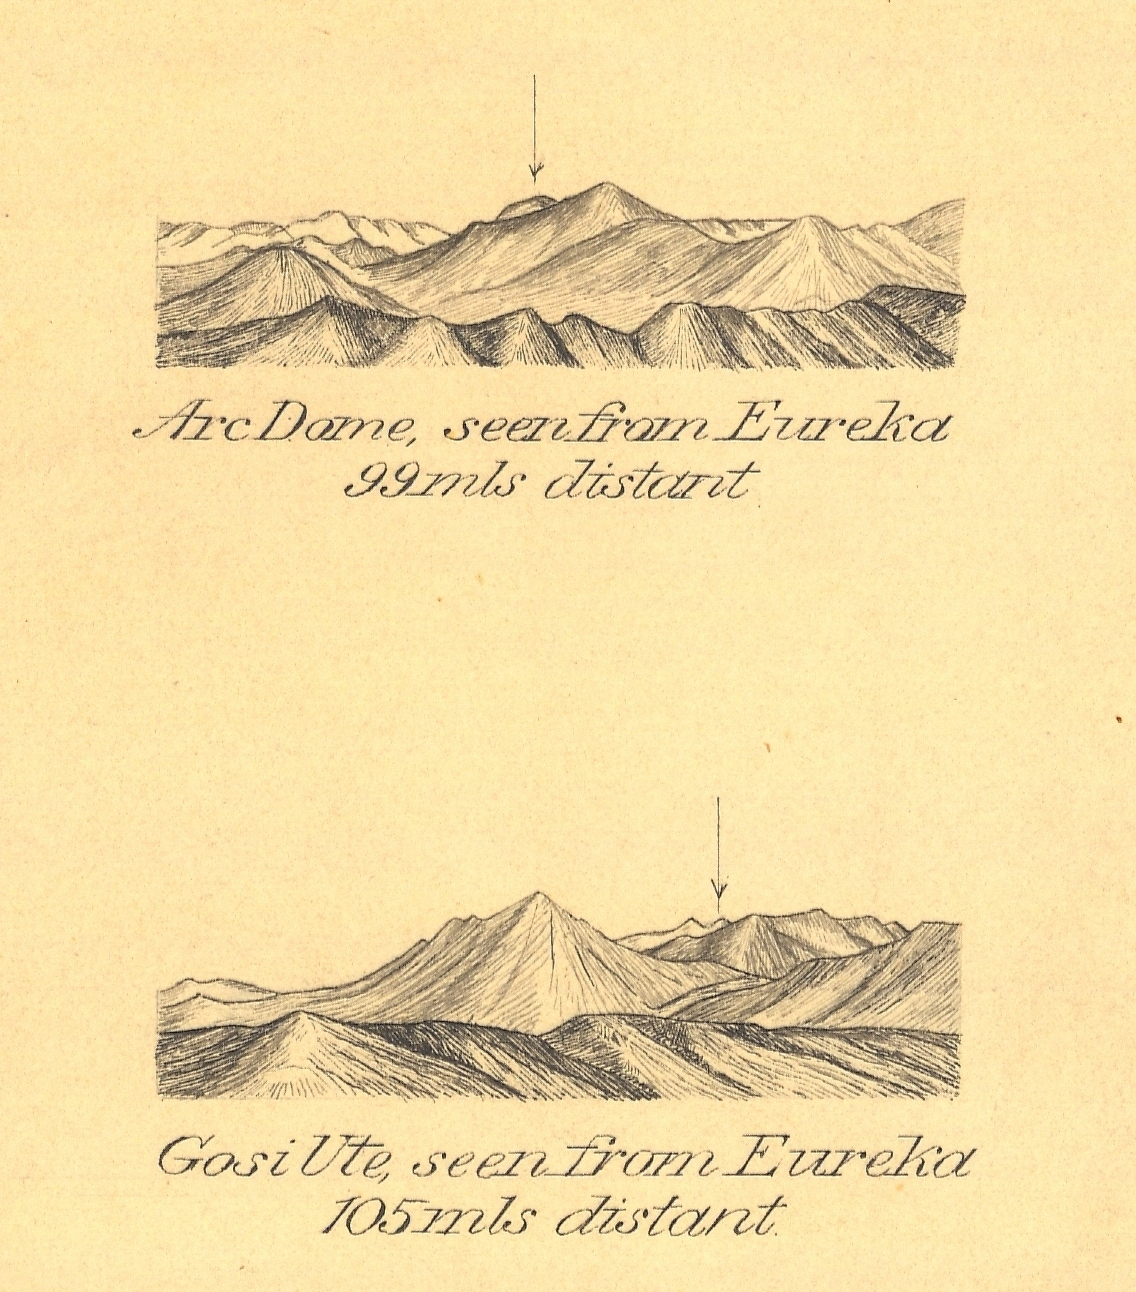 Reconnaissance views across the mountains of the Great Basin at the beginning of the work on the 39th Parallel Arc of Triangulation which extended from Atlantic to Pacific, at the time the longest arc of the parallel ever observed